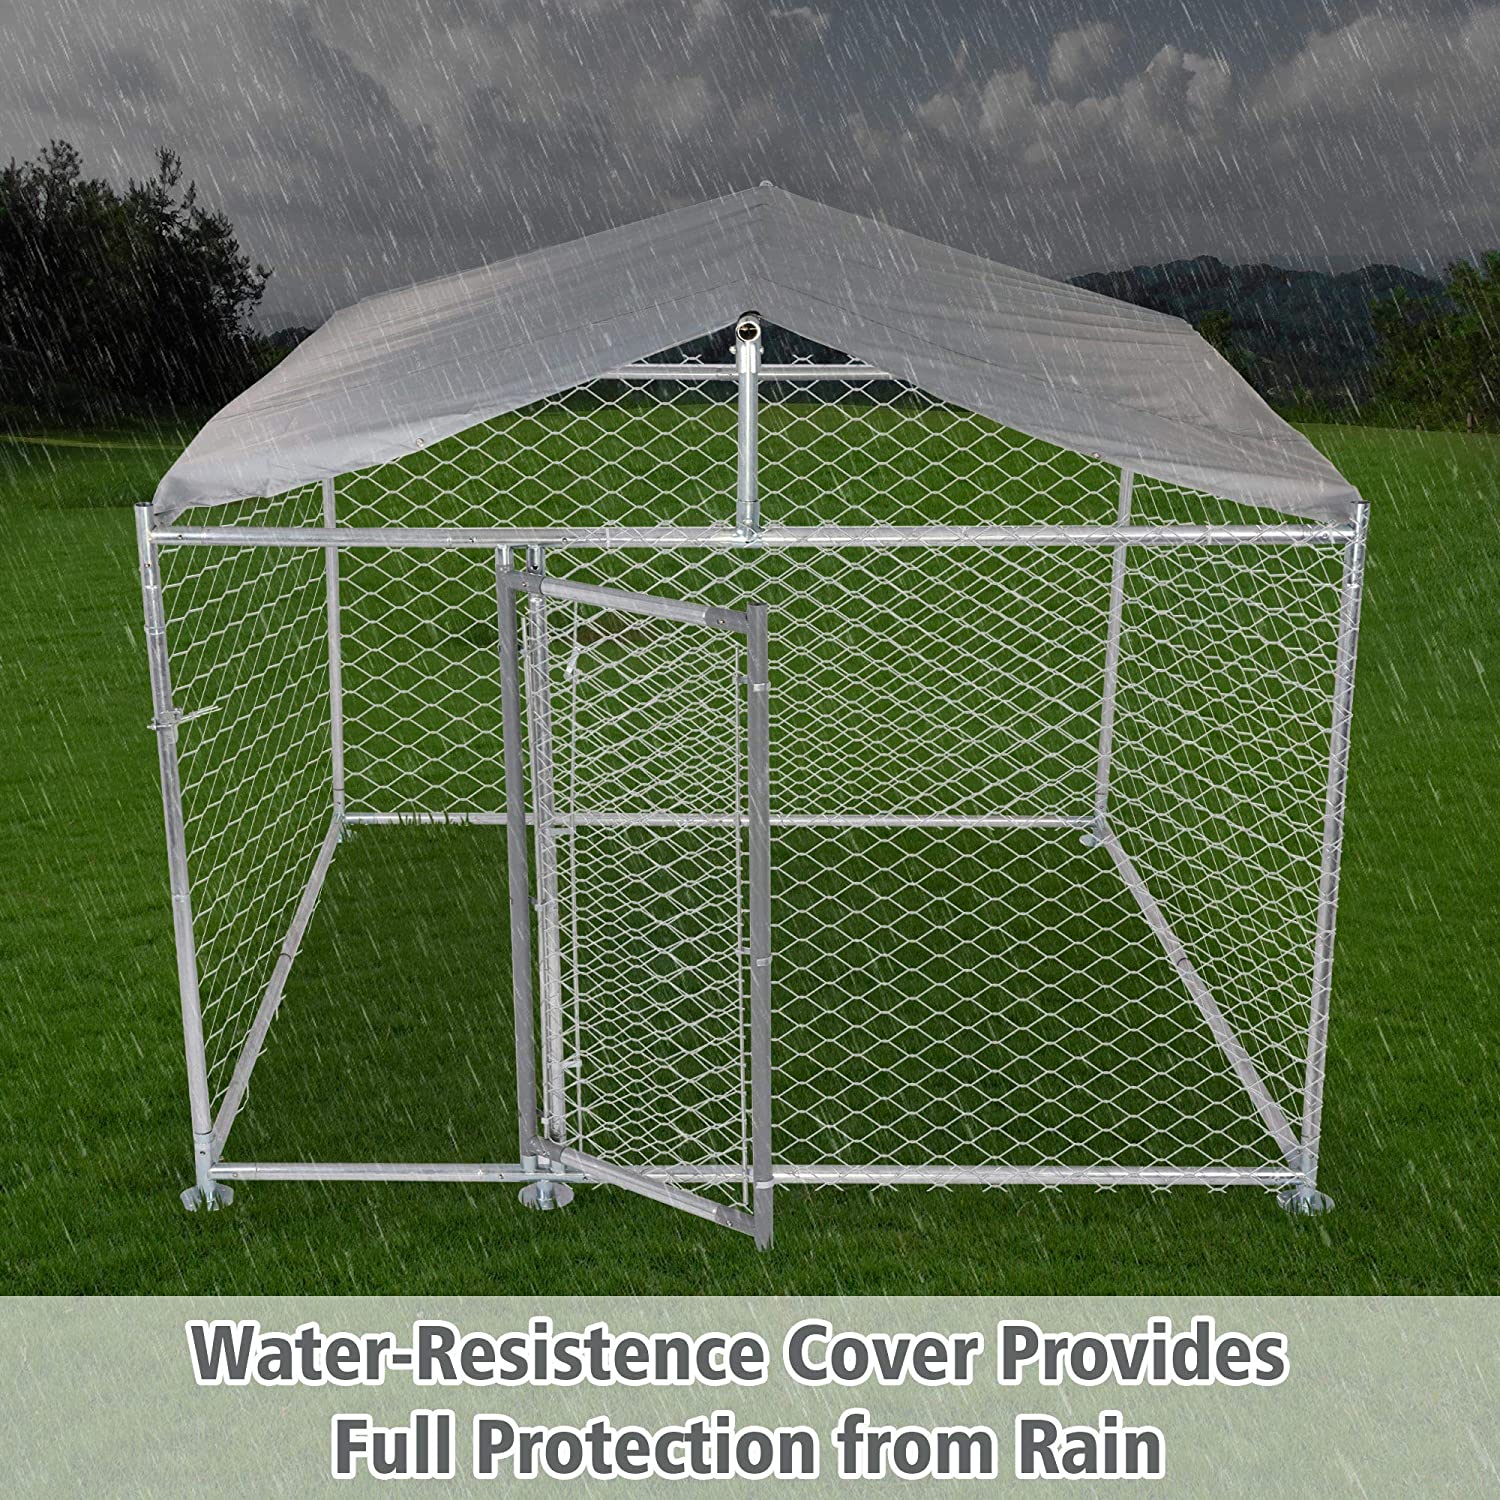 Outdoor Dog Kennel Galvanized Mesh Steel Dog Chain Link Fence Playpen with Cover 6.5x6.5x5ft